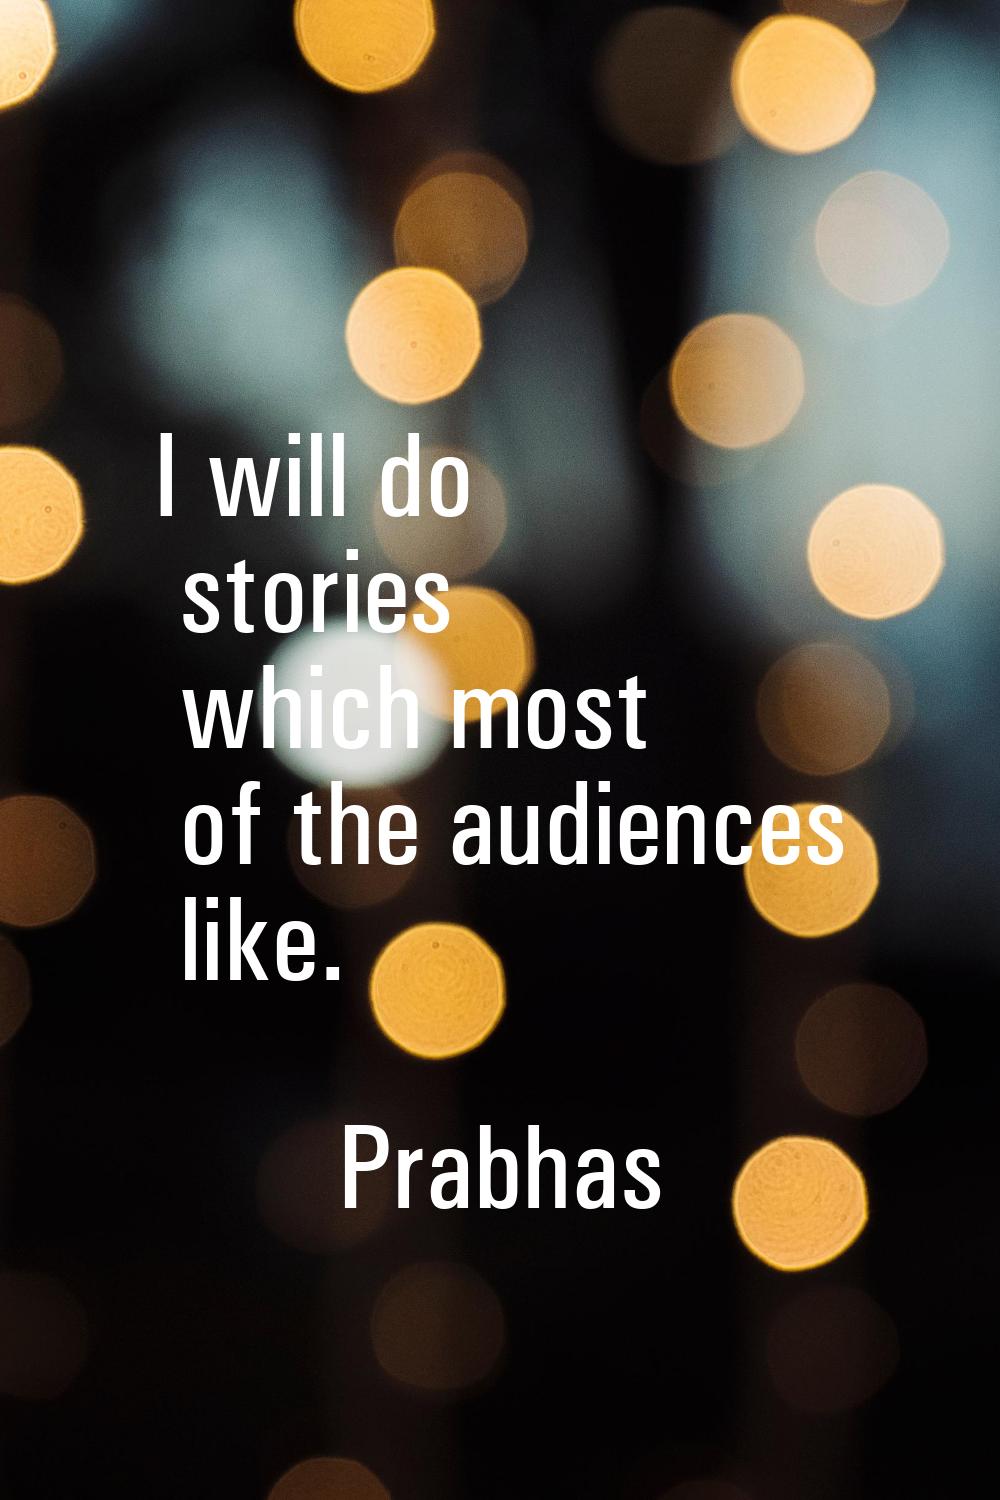 I will do stories which most of the audiences like.